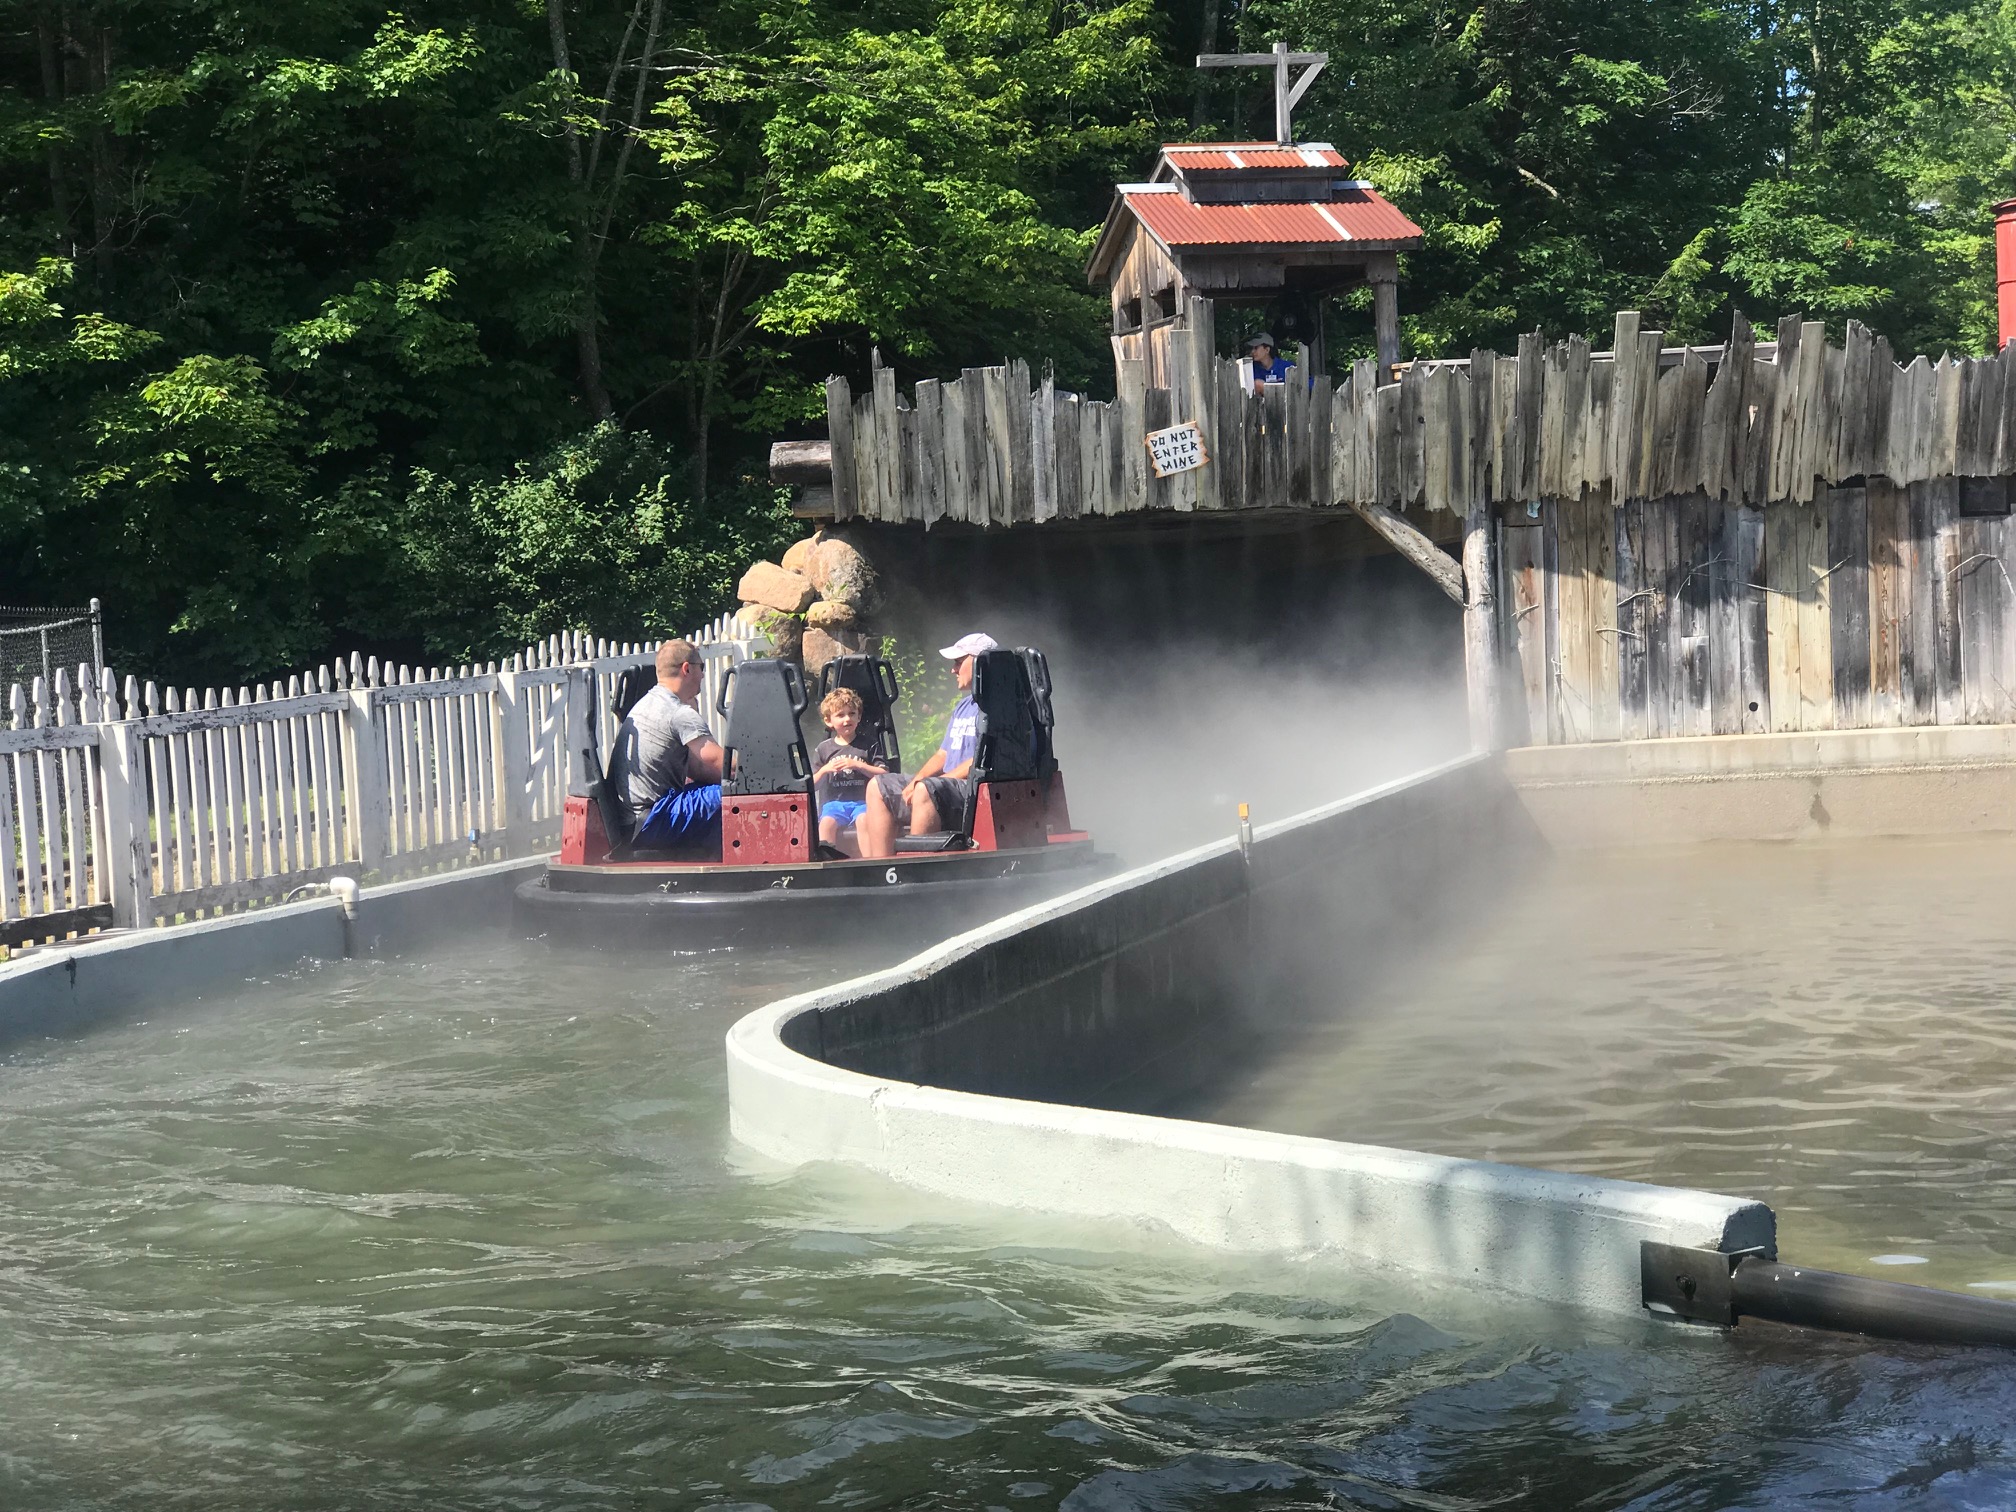 Dr. Geyser's Remarkable Raft Ride at Story Land